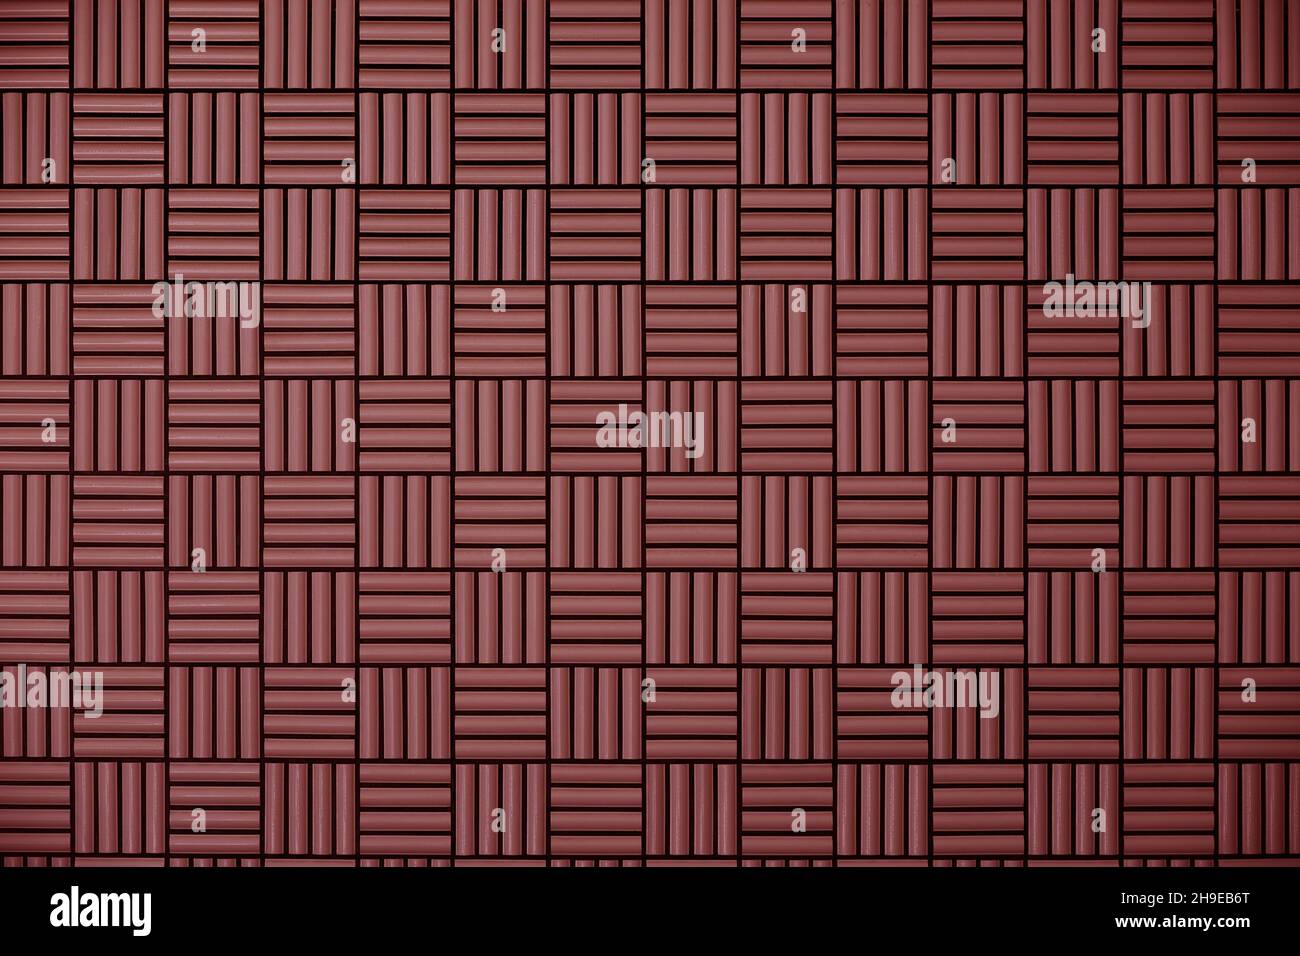 Red tile wall with geometric pattern as background material Stock Photo